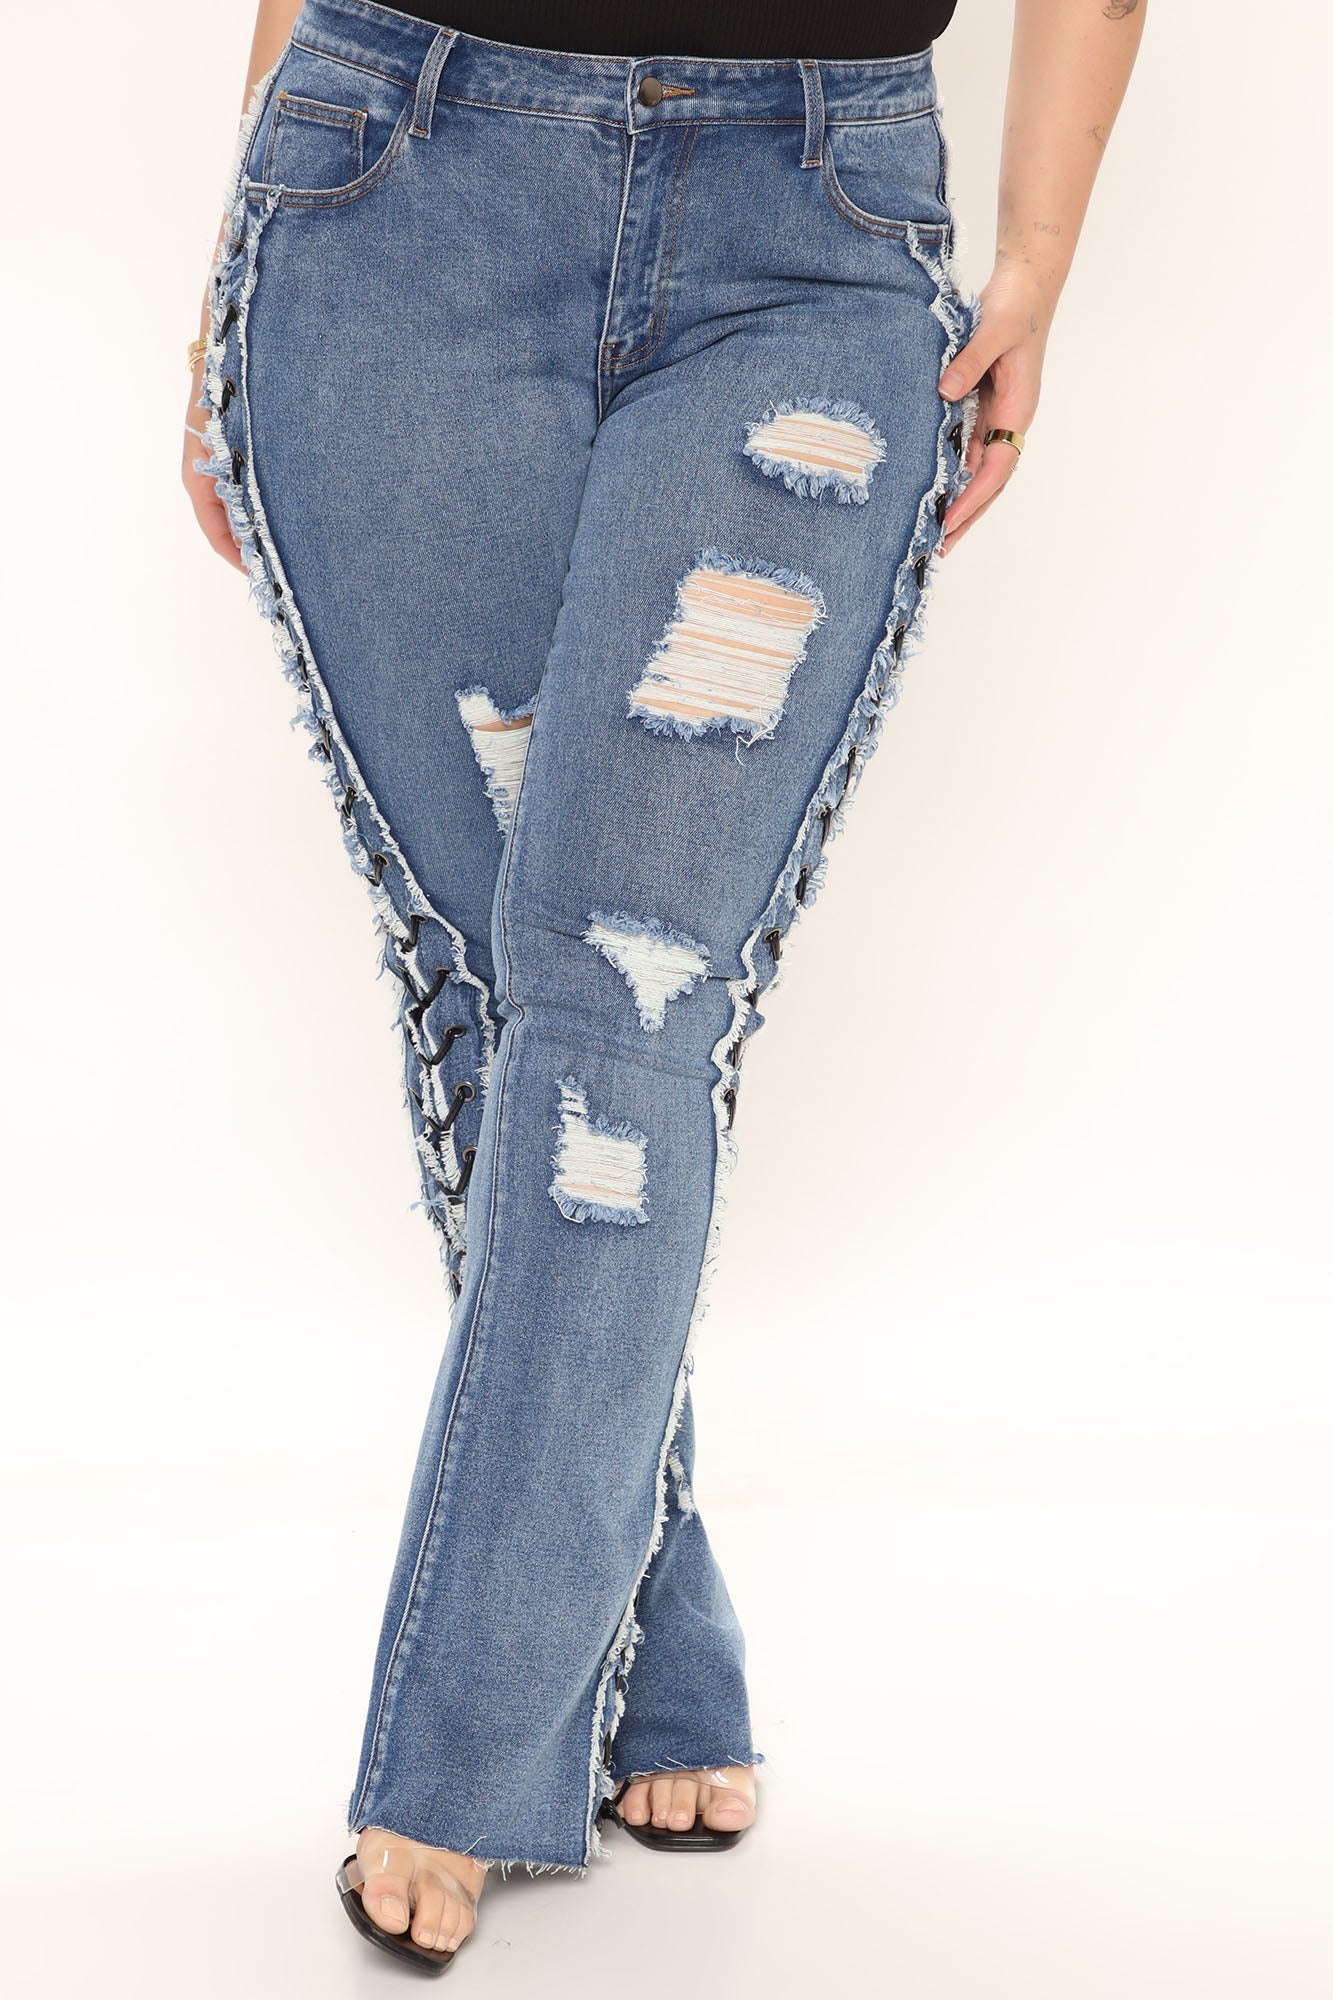 All Laced Up Mid Rise Bootcut Jeans - Medium Blue Wash